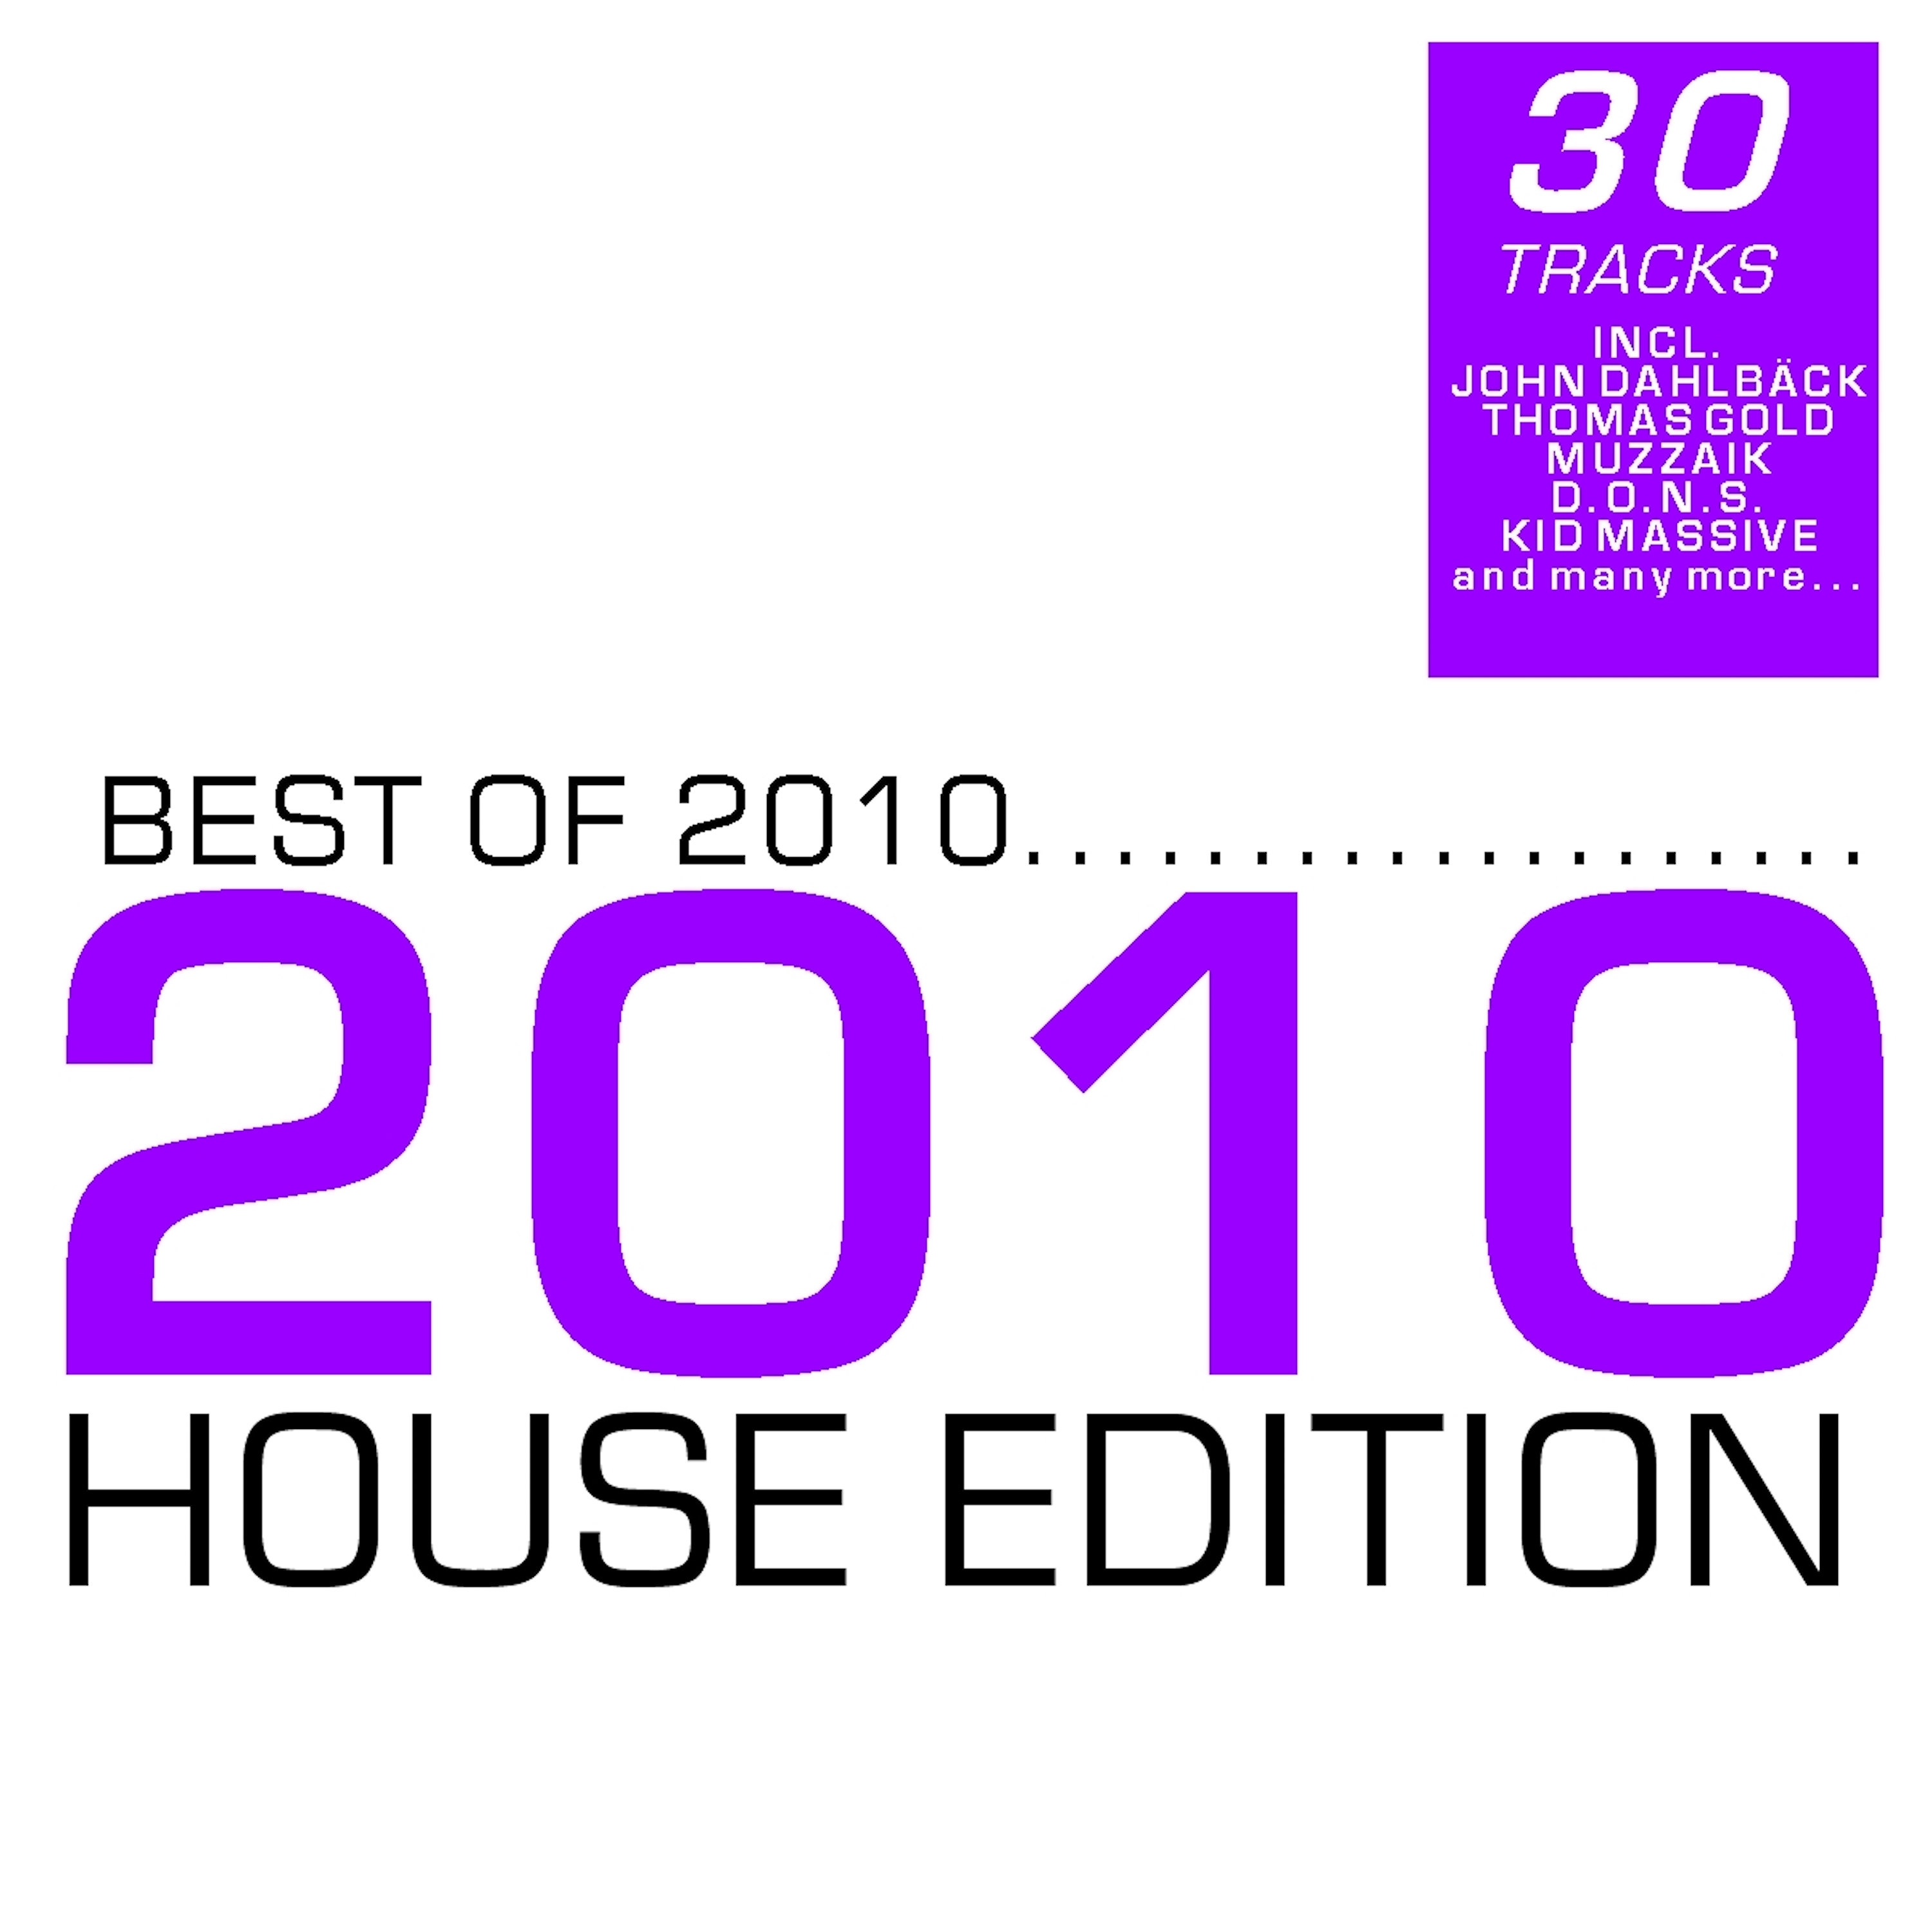 Best Of 2010 - House Edition